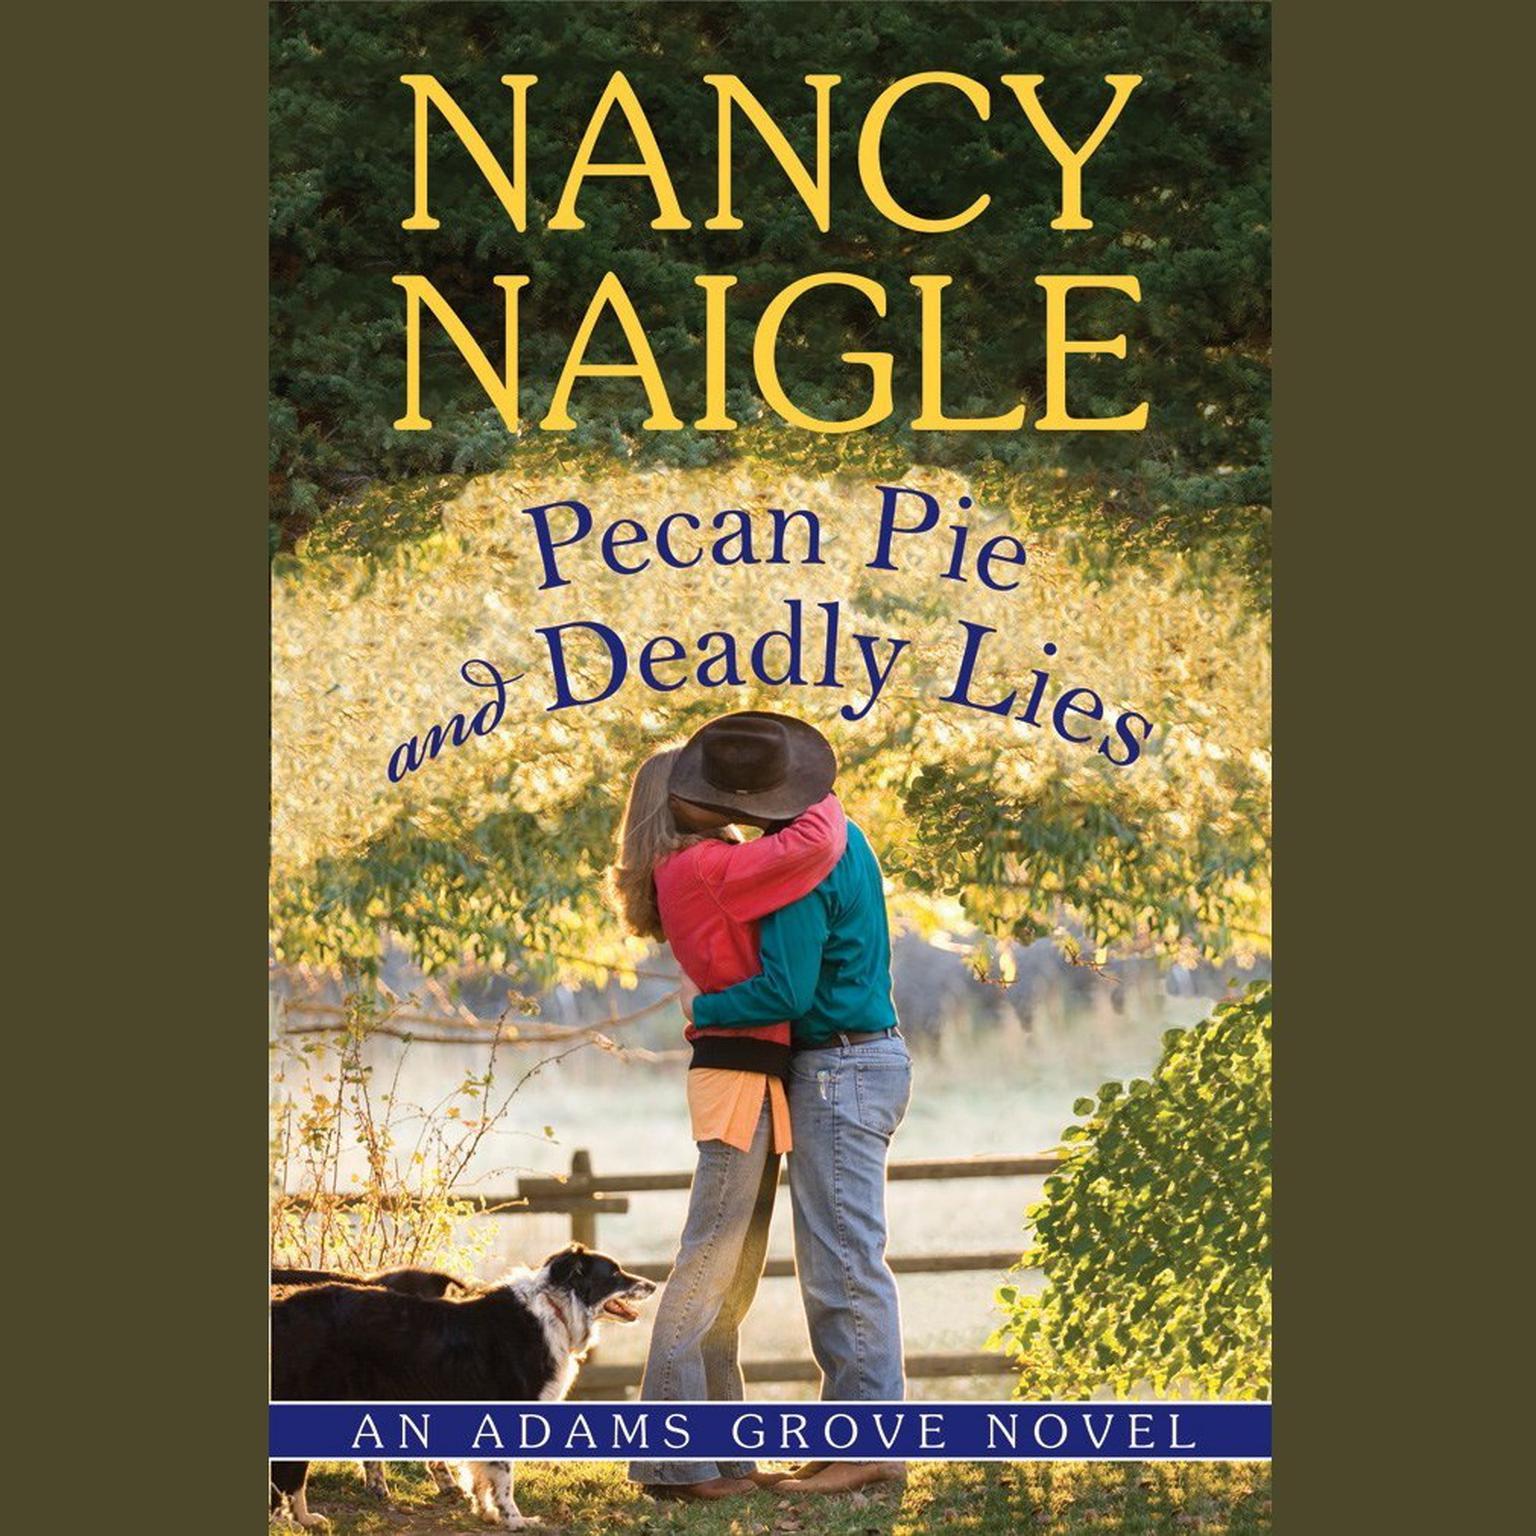 Pecan Pie and Deadly Lies Audiobook, by Nancy Naigle